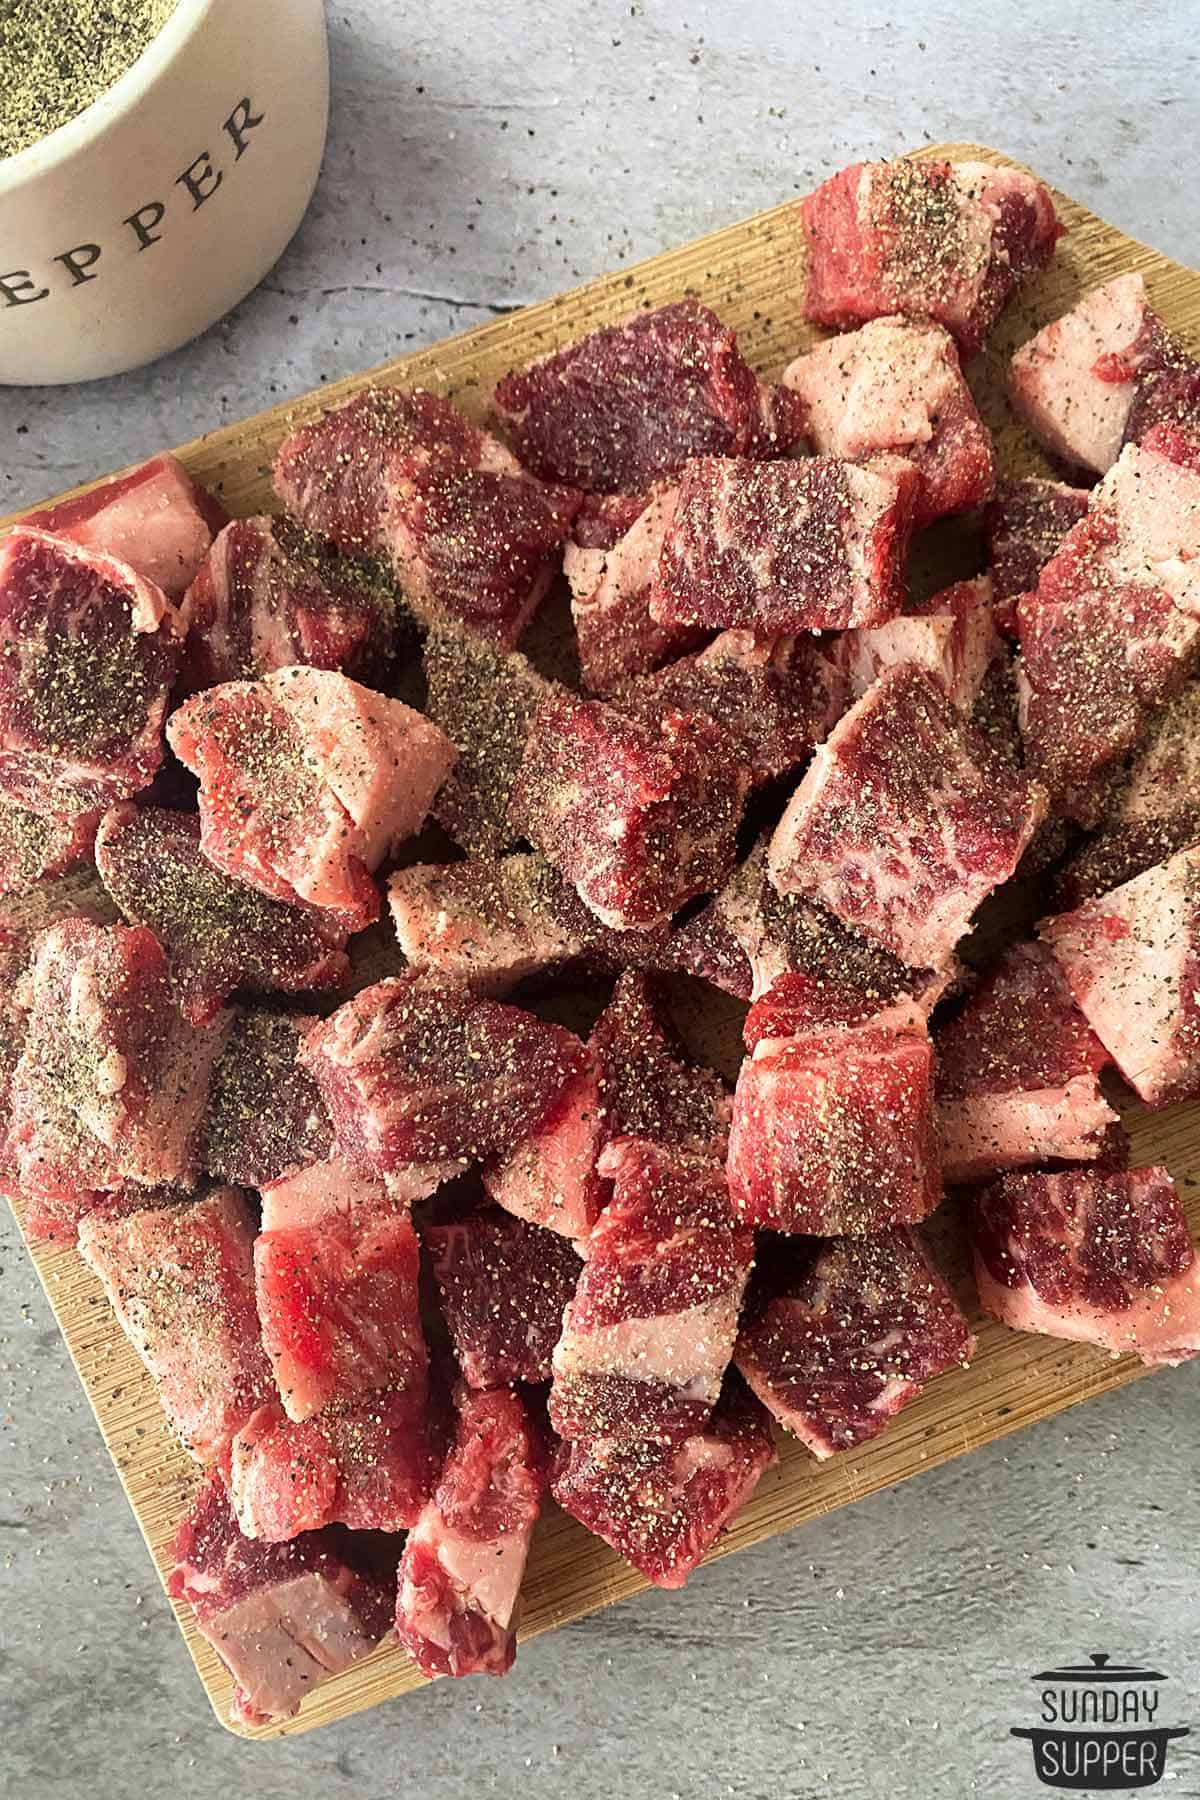 the sliced short ribs seasoned with salt and pepper